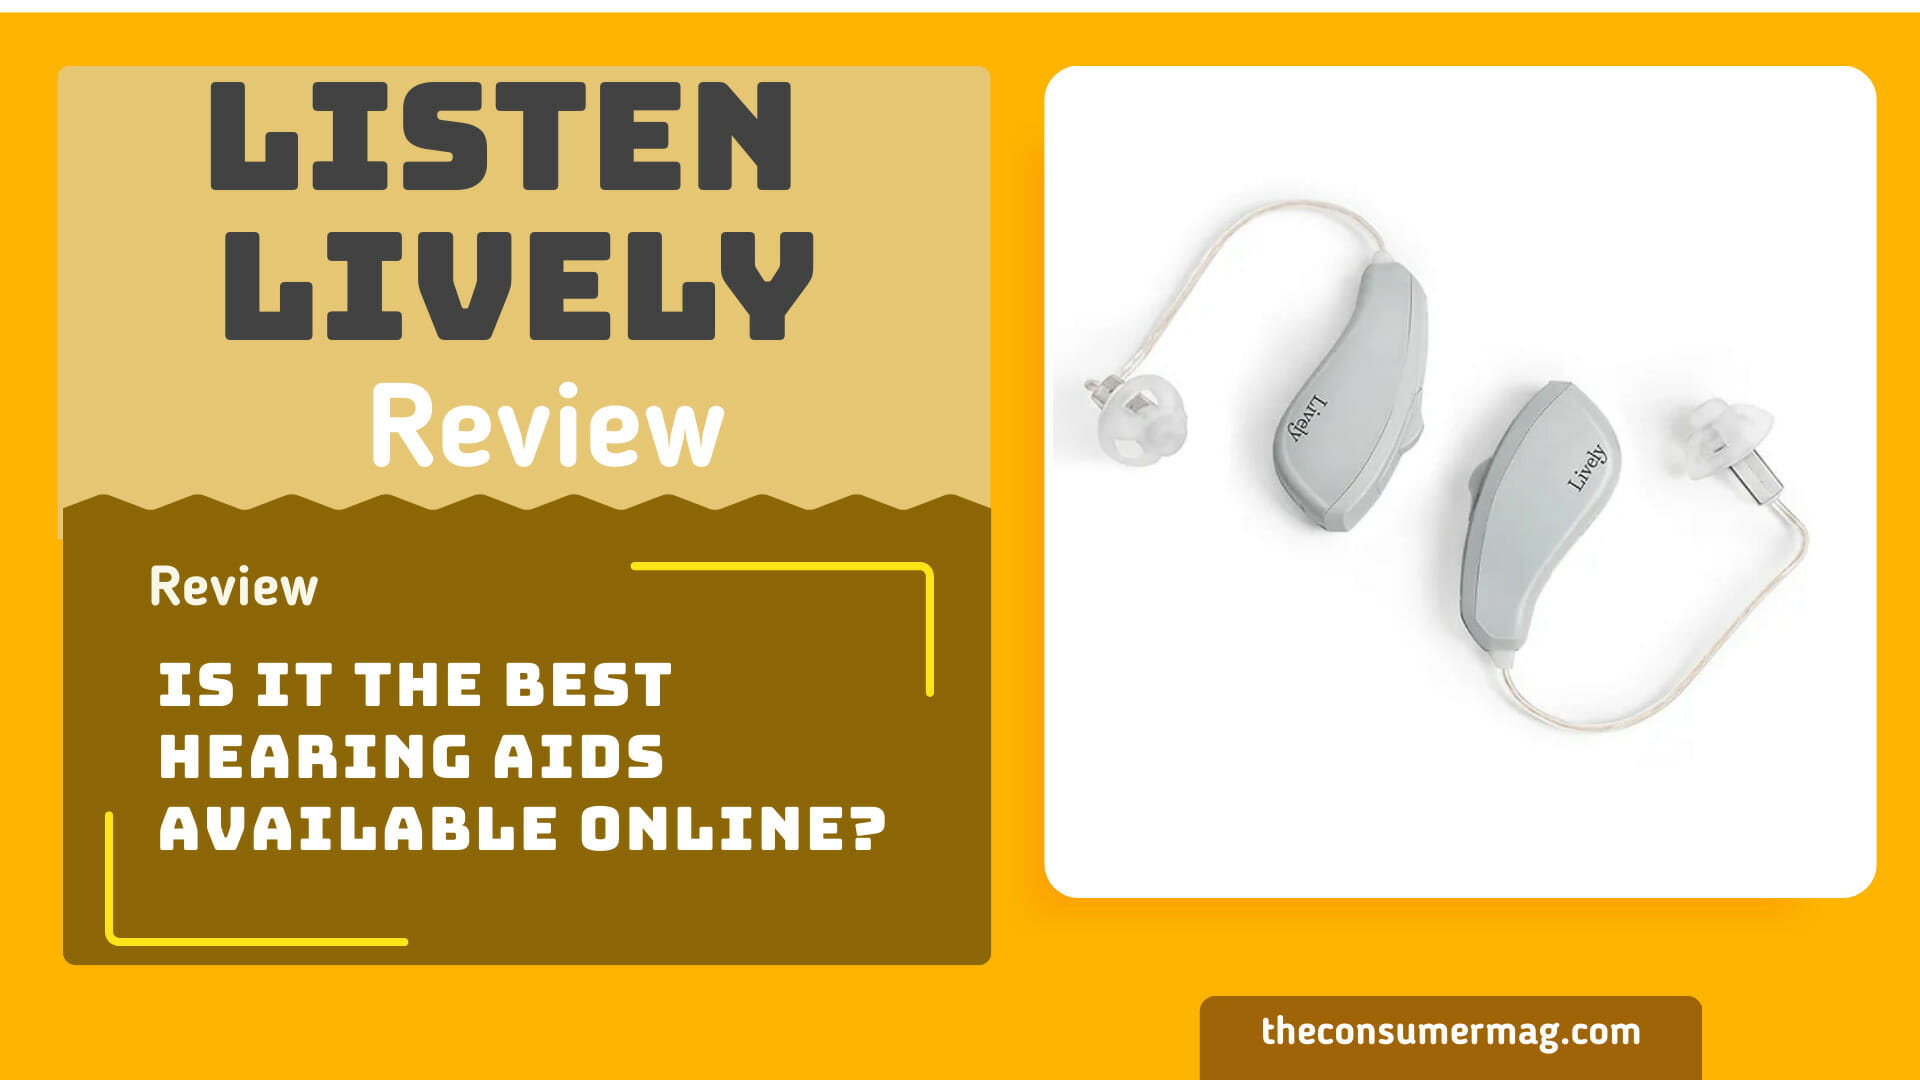 Listen Lively Hearing Aid Reviews: See Lively Hearing Aid Reviews and Cost